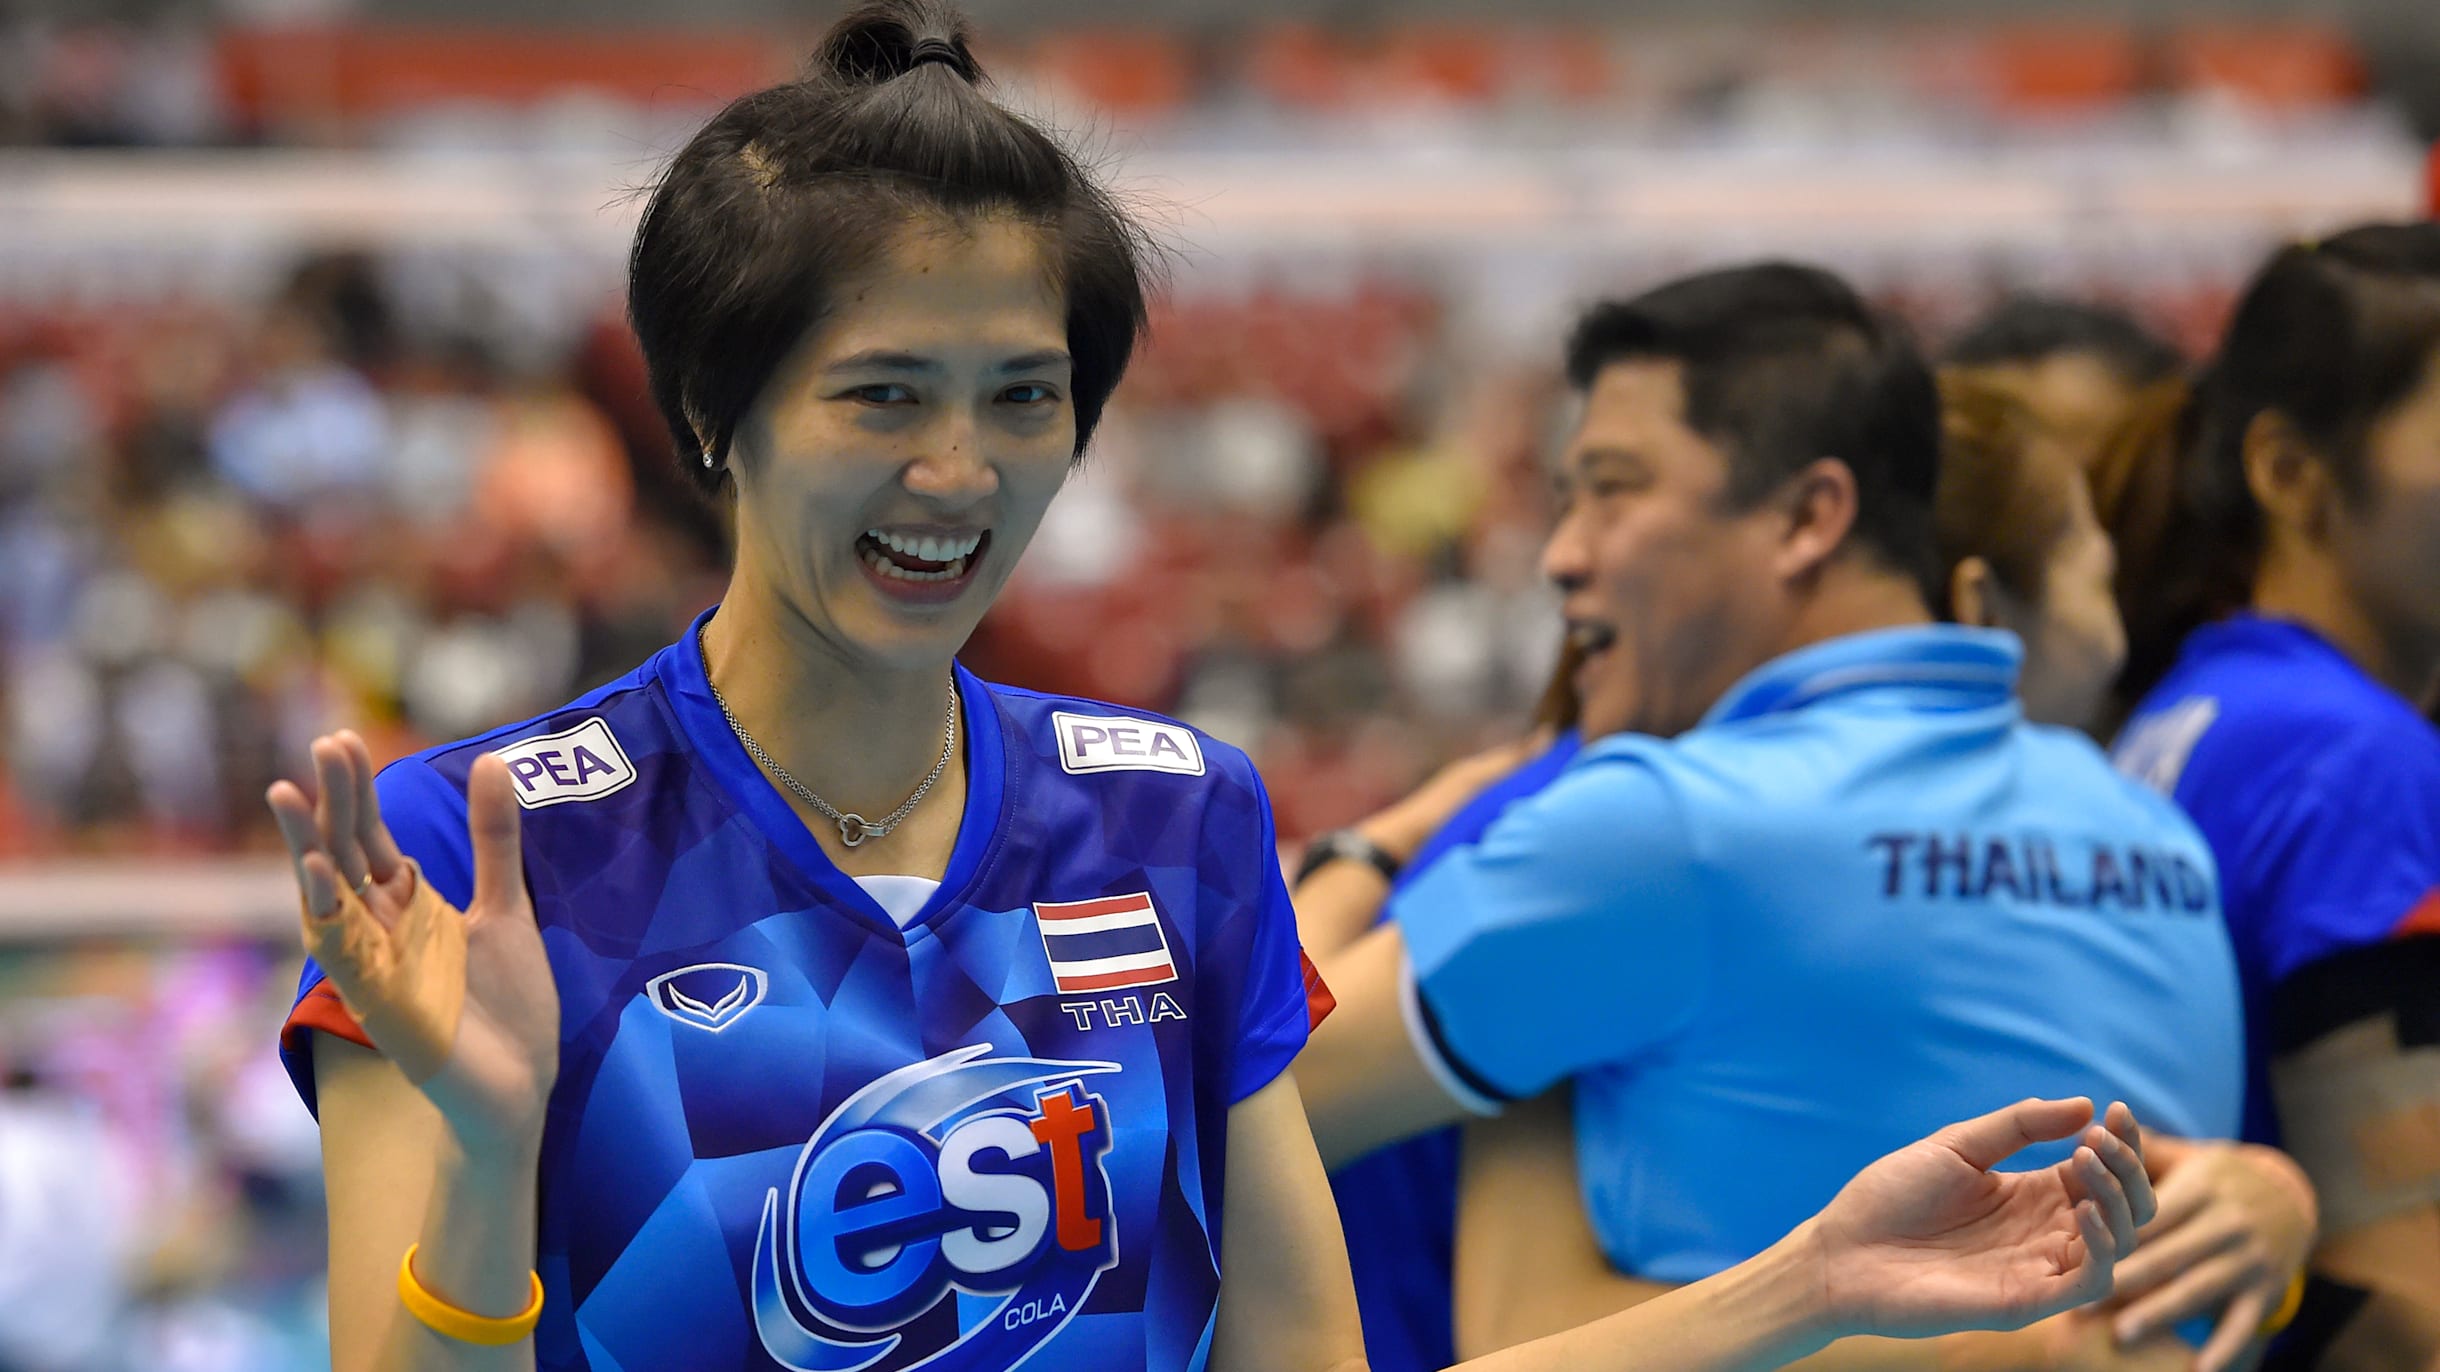 Pleumjit Thinkaow Thailand womens captain has one of the biggest social media followings in volleyball